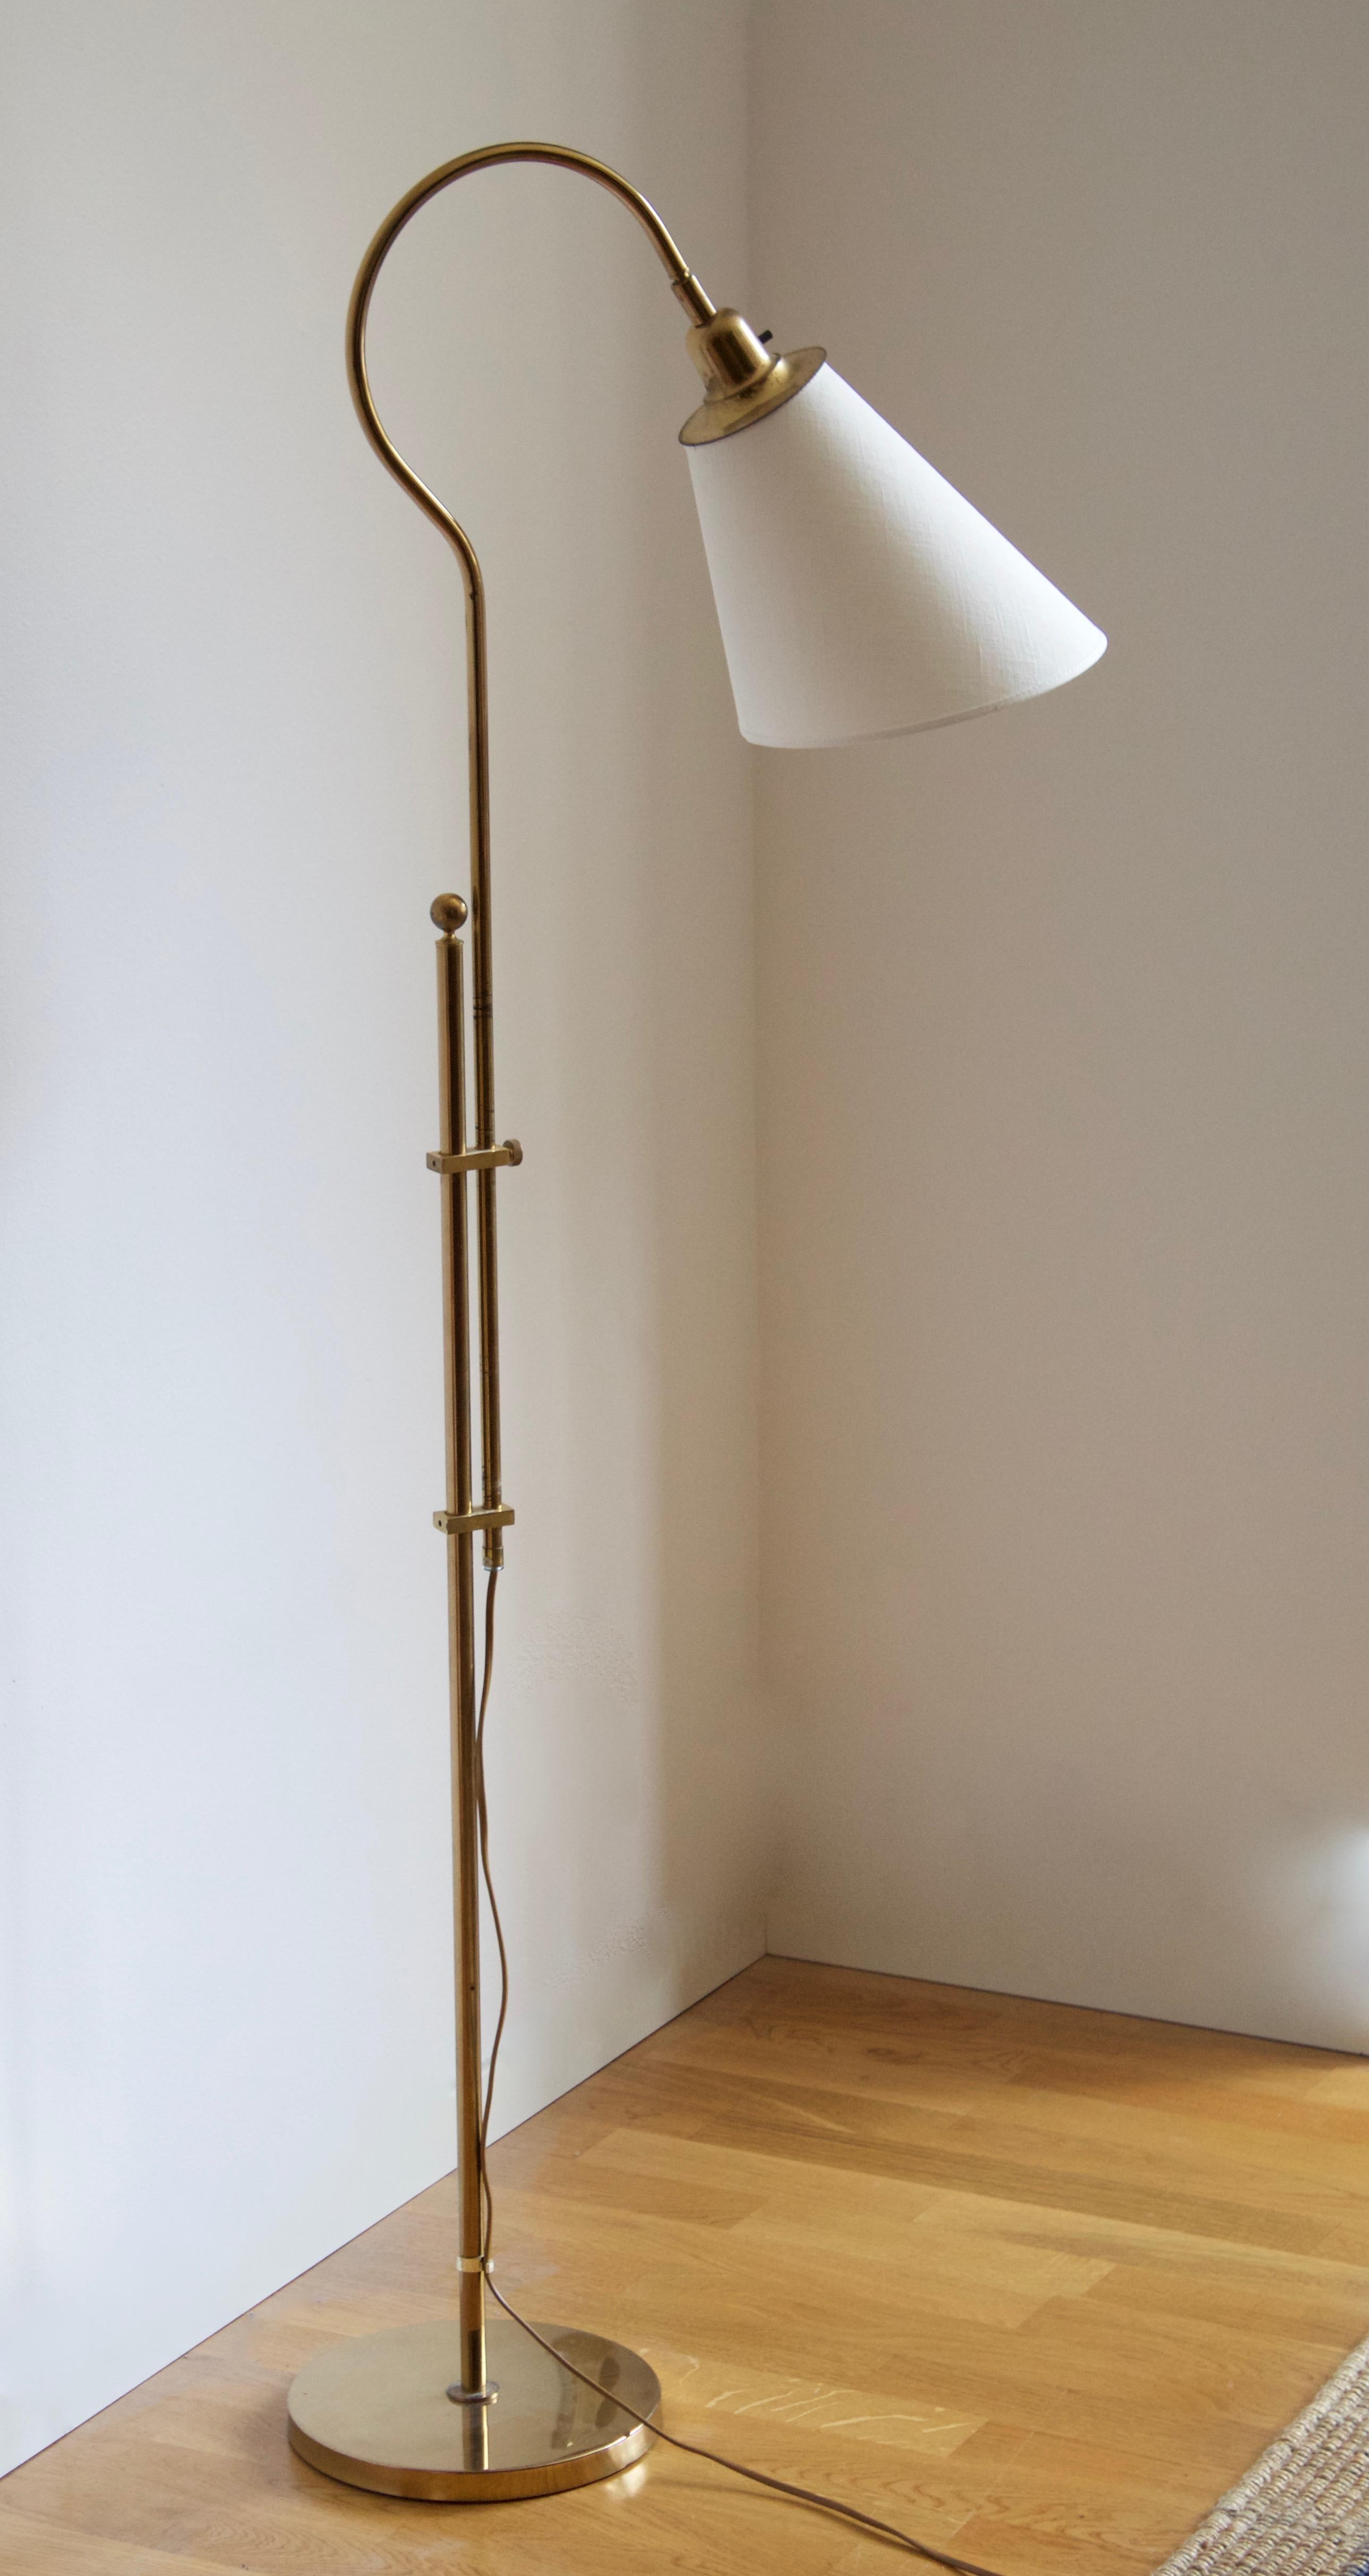 An adjustable floor lamp. Designed and produced by Bergboms, Sweden, c. 1970s. Brand new fabric lampshade.

Other designers of the period include Paavo Tynell, Hans Bergström, Josef Frank, and Kaare Klint.